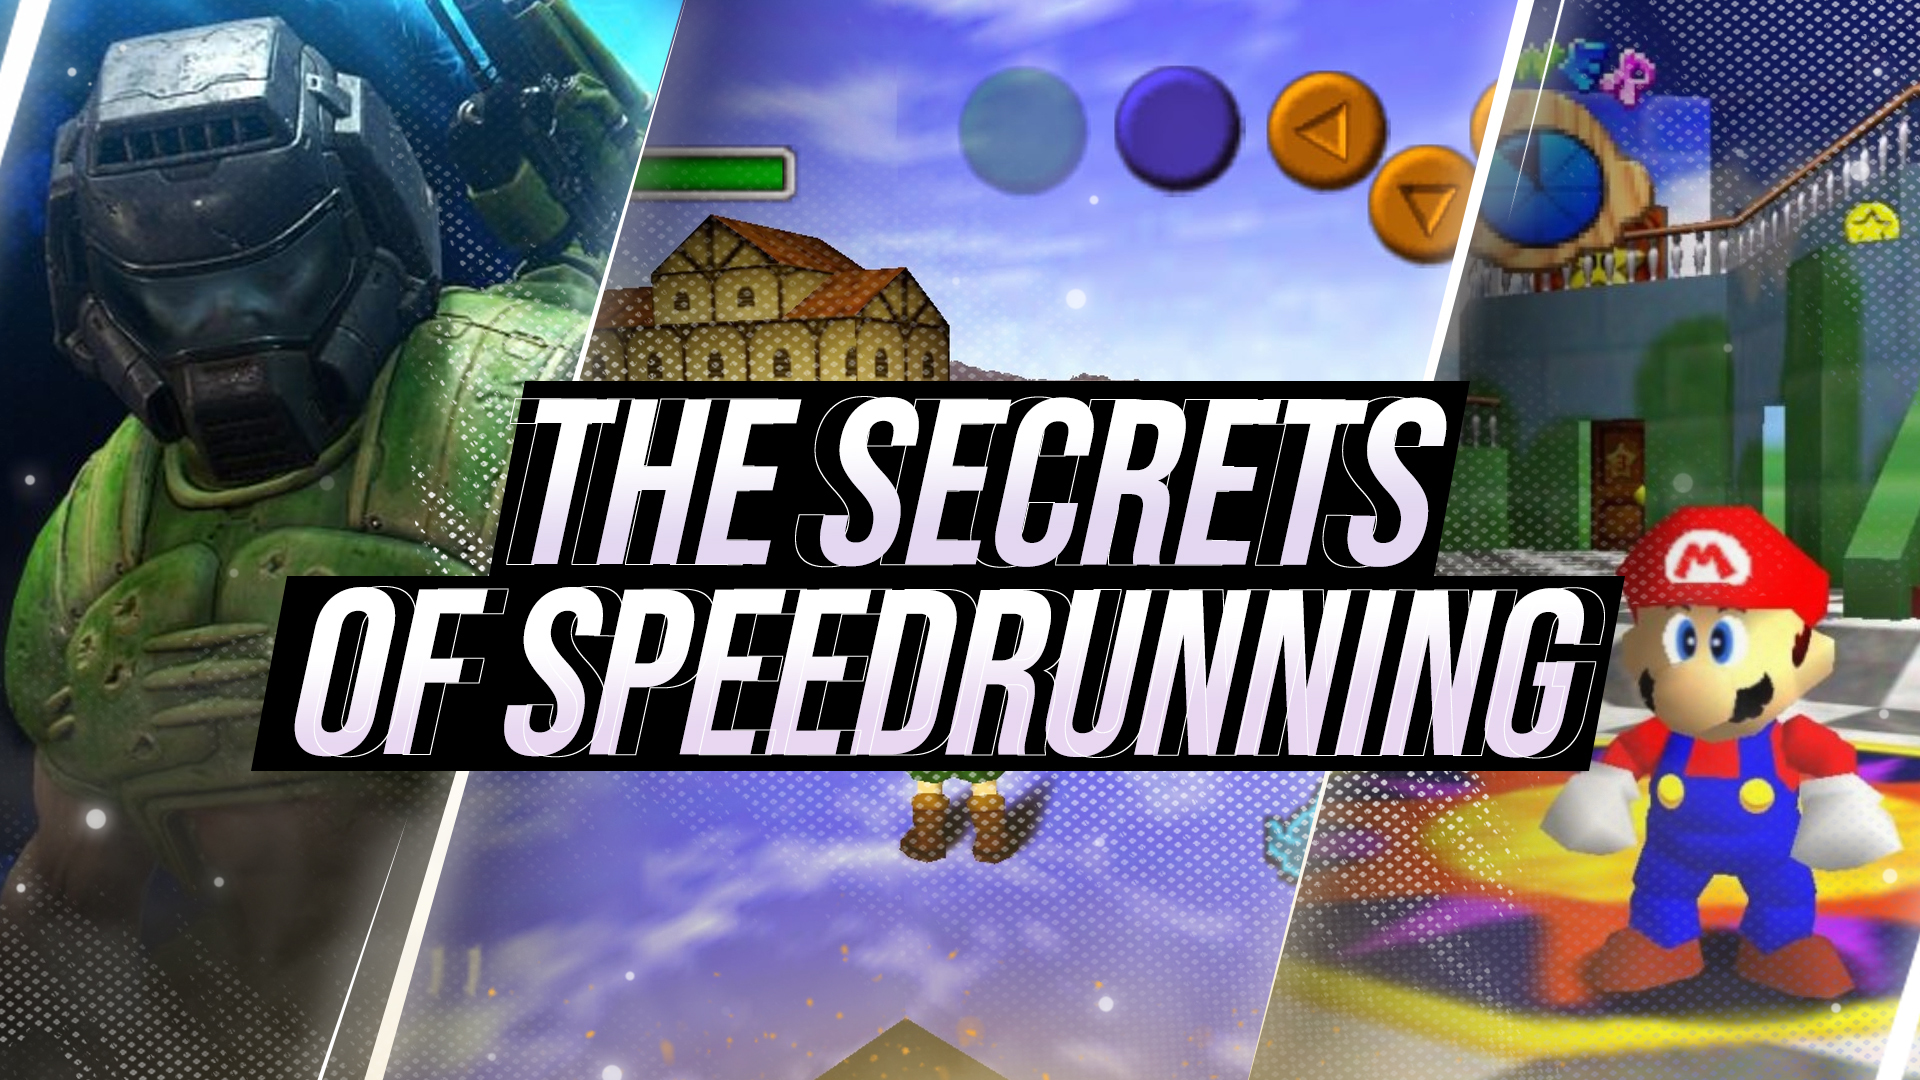 Speedrunning video games isn't just about beating the game as fast